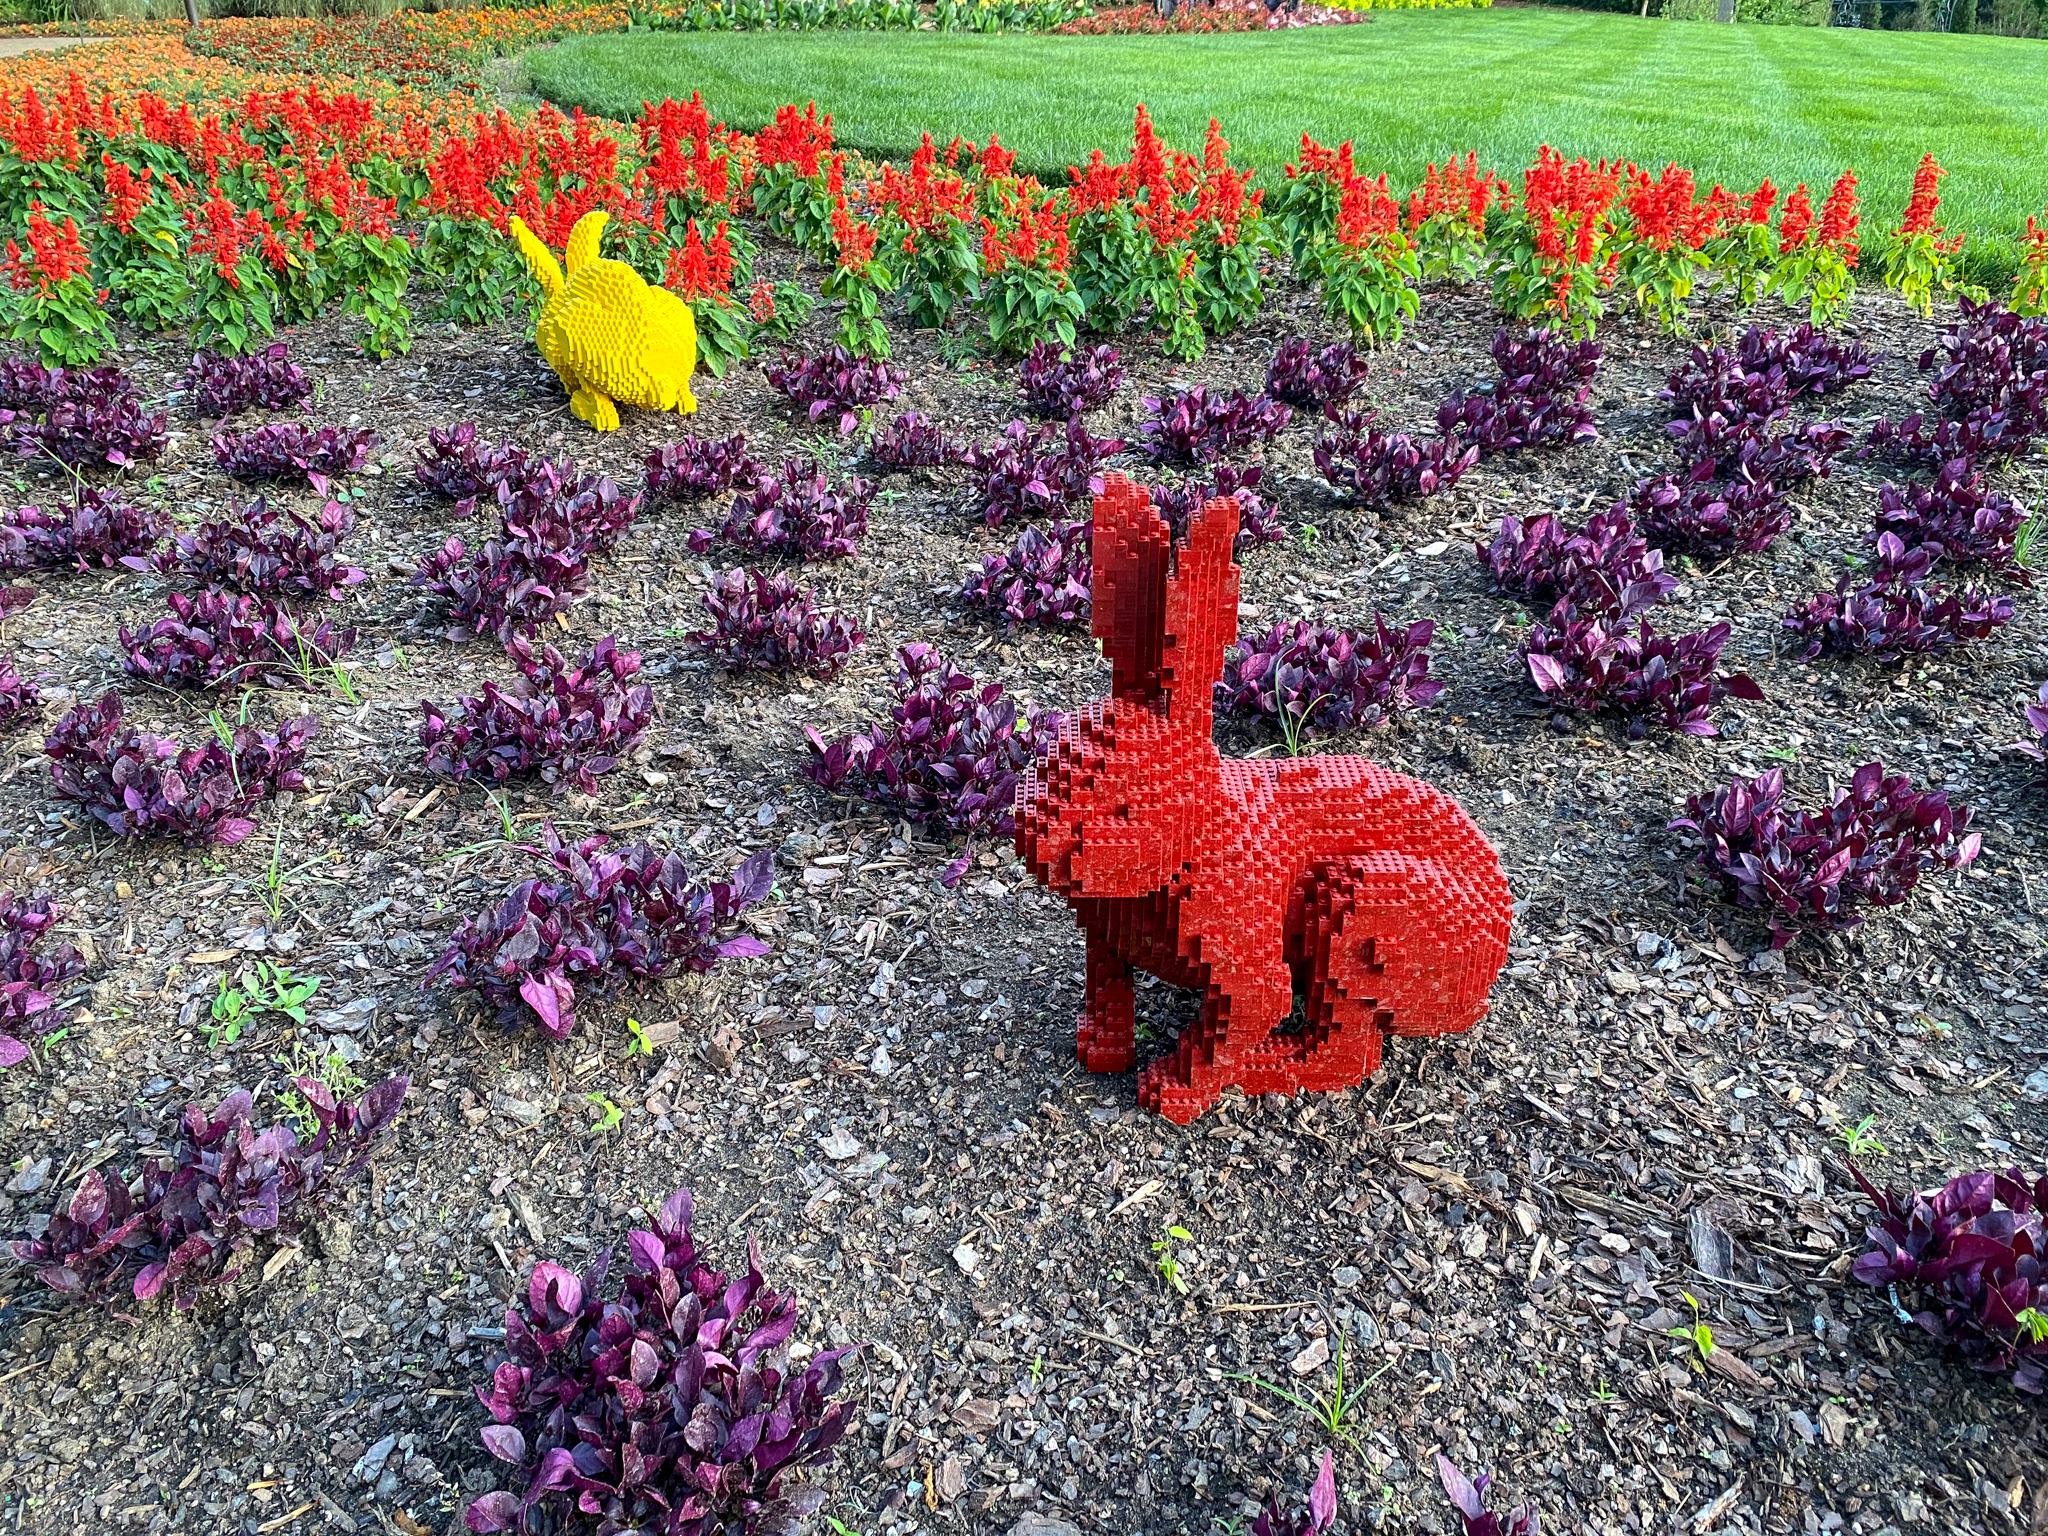 Red Lego rabbit in foreground and yellow Lego rabbit in background surrounded by purple foliage annuals 